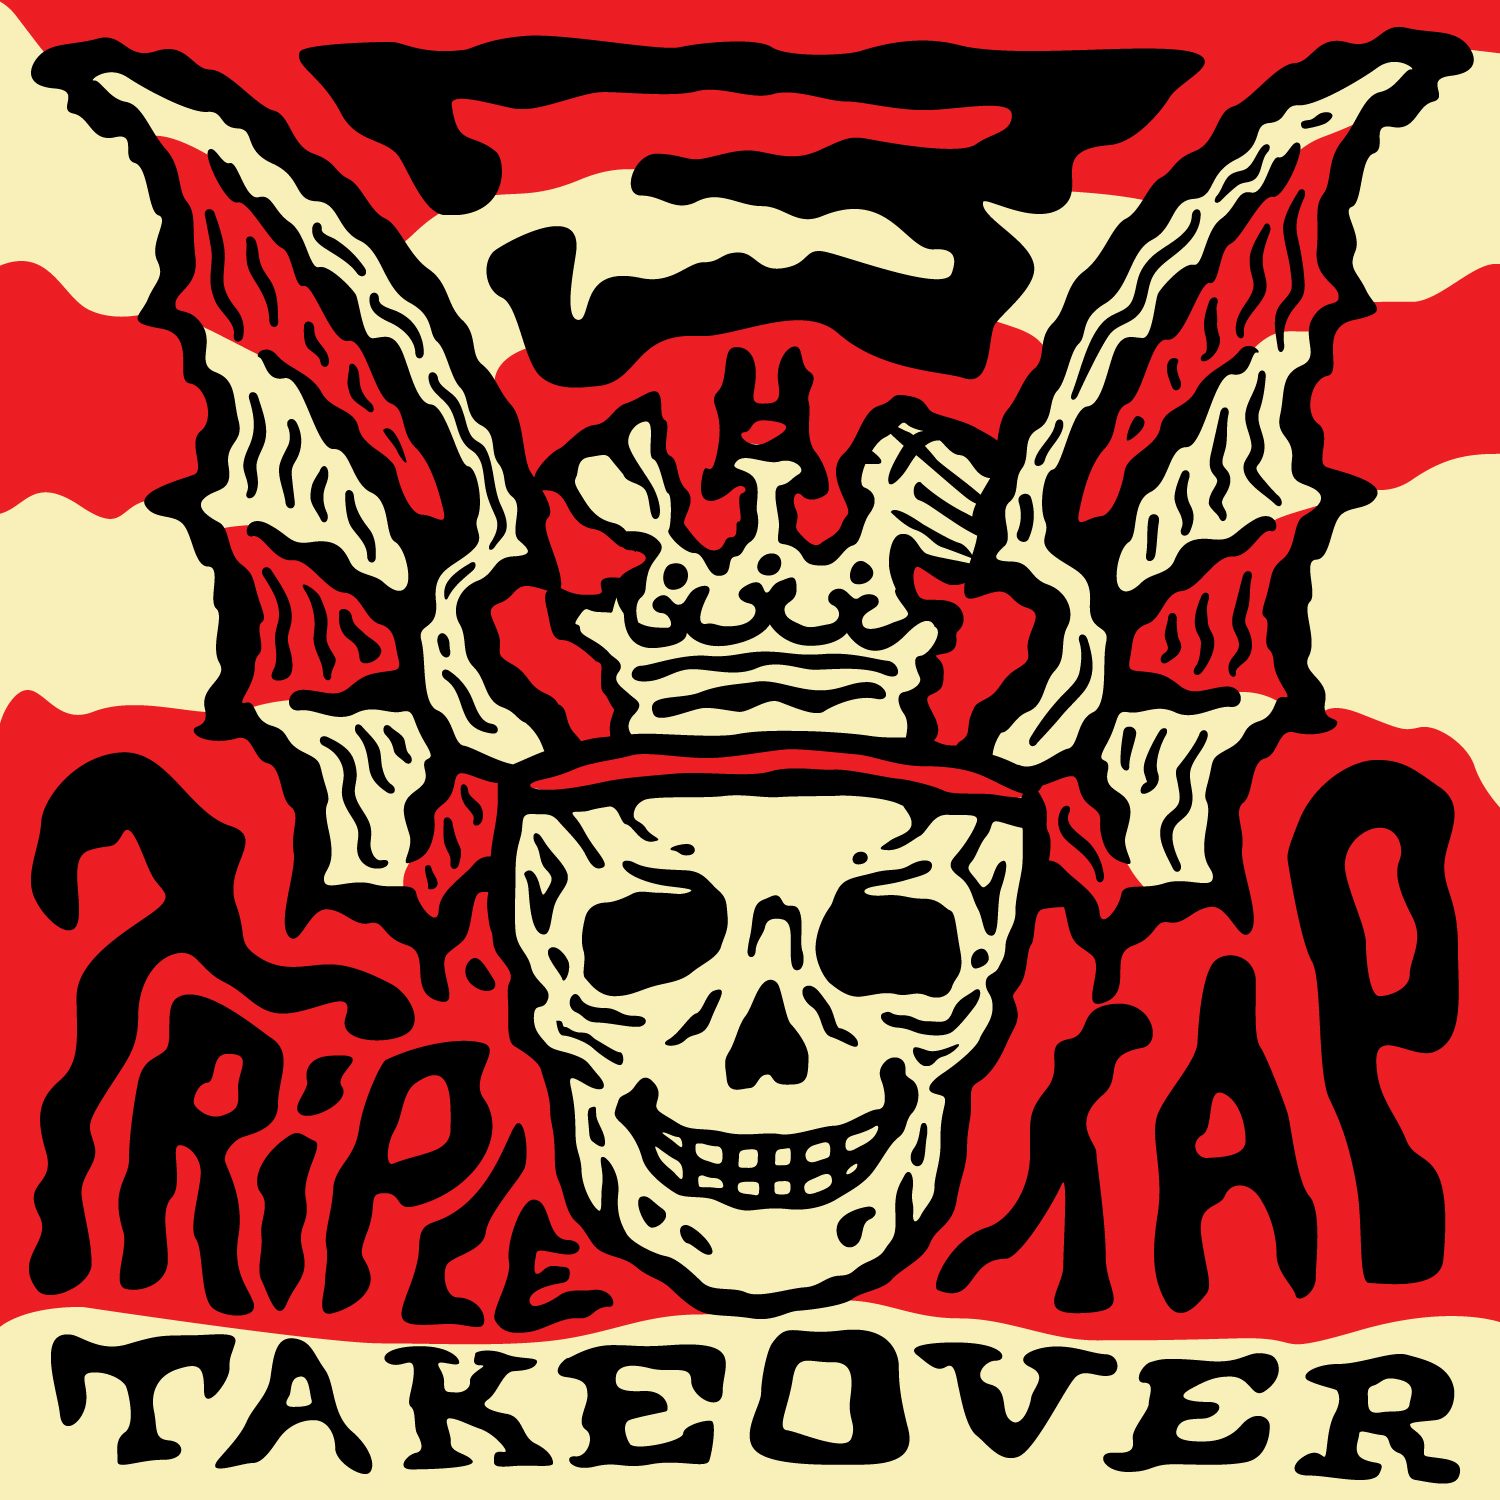 APEX to Host Triple Tap Takeover with 3 Floyds, Boneyard and Gigantic